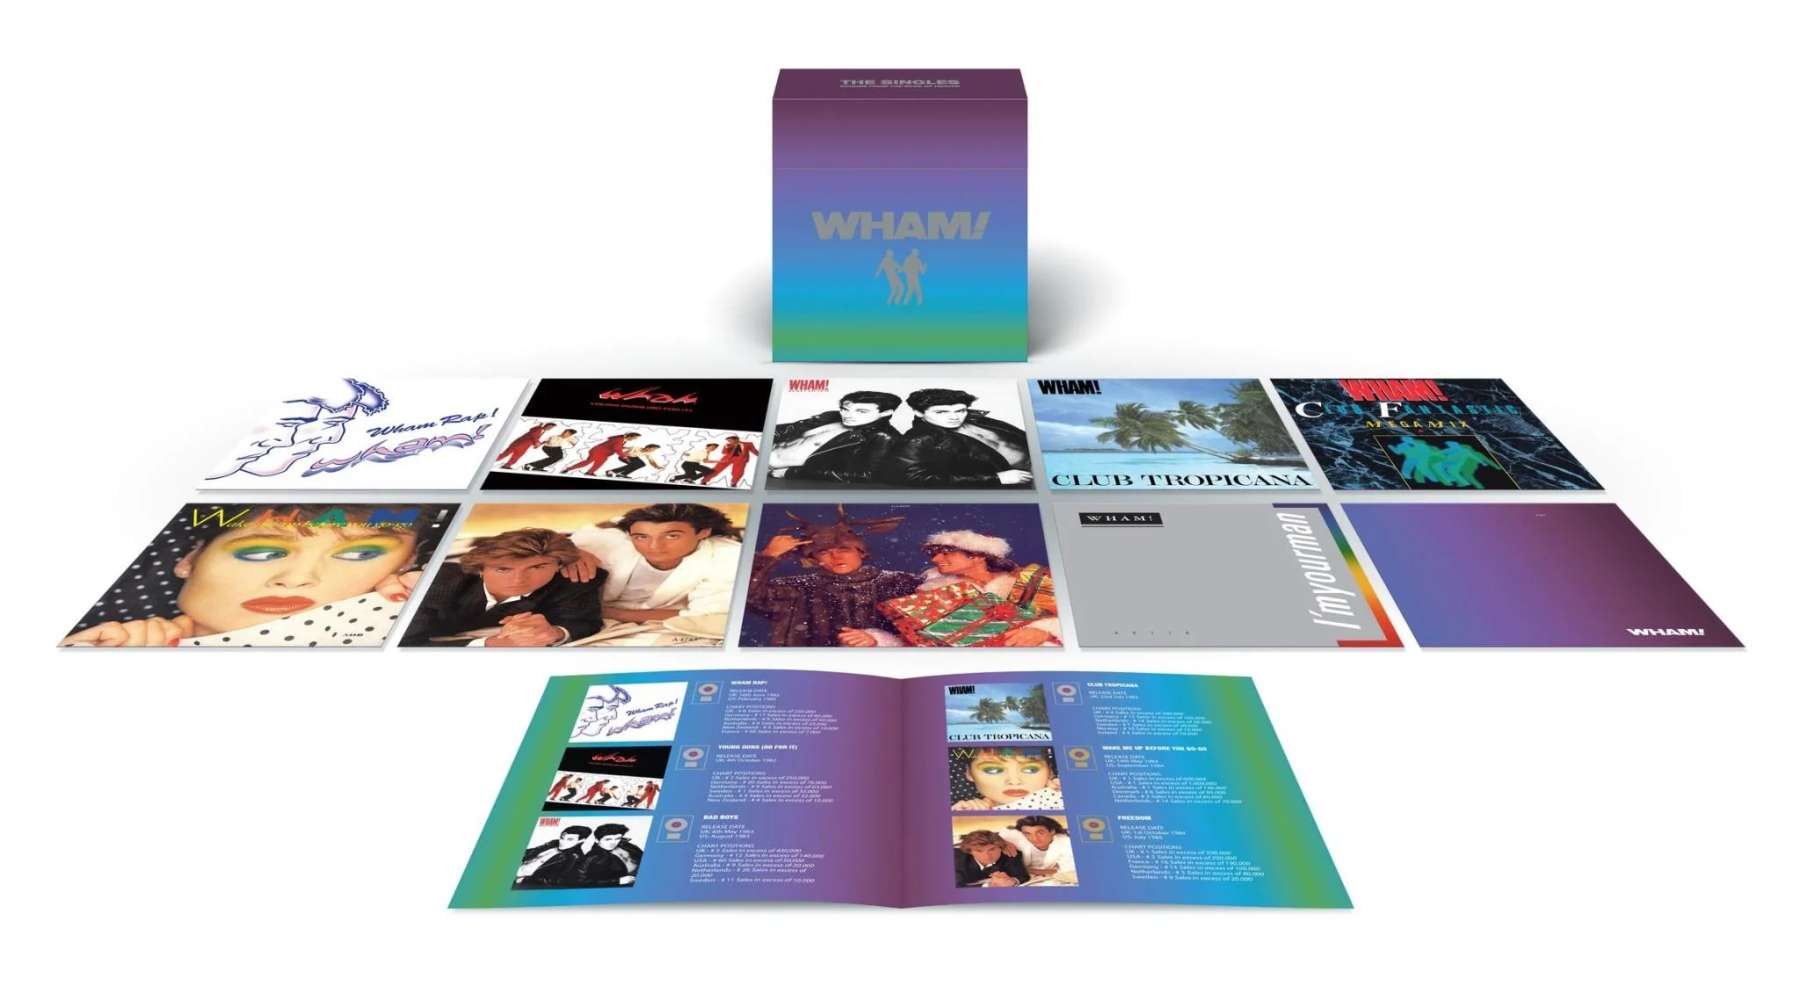 Wham! Echoes From The Edge Of Heaven CD singles box: What’s missing?